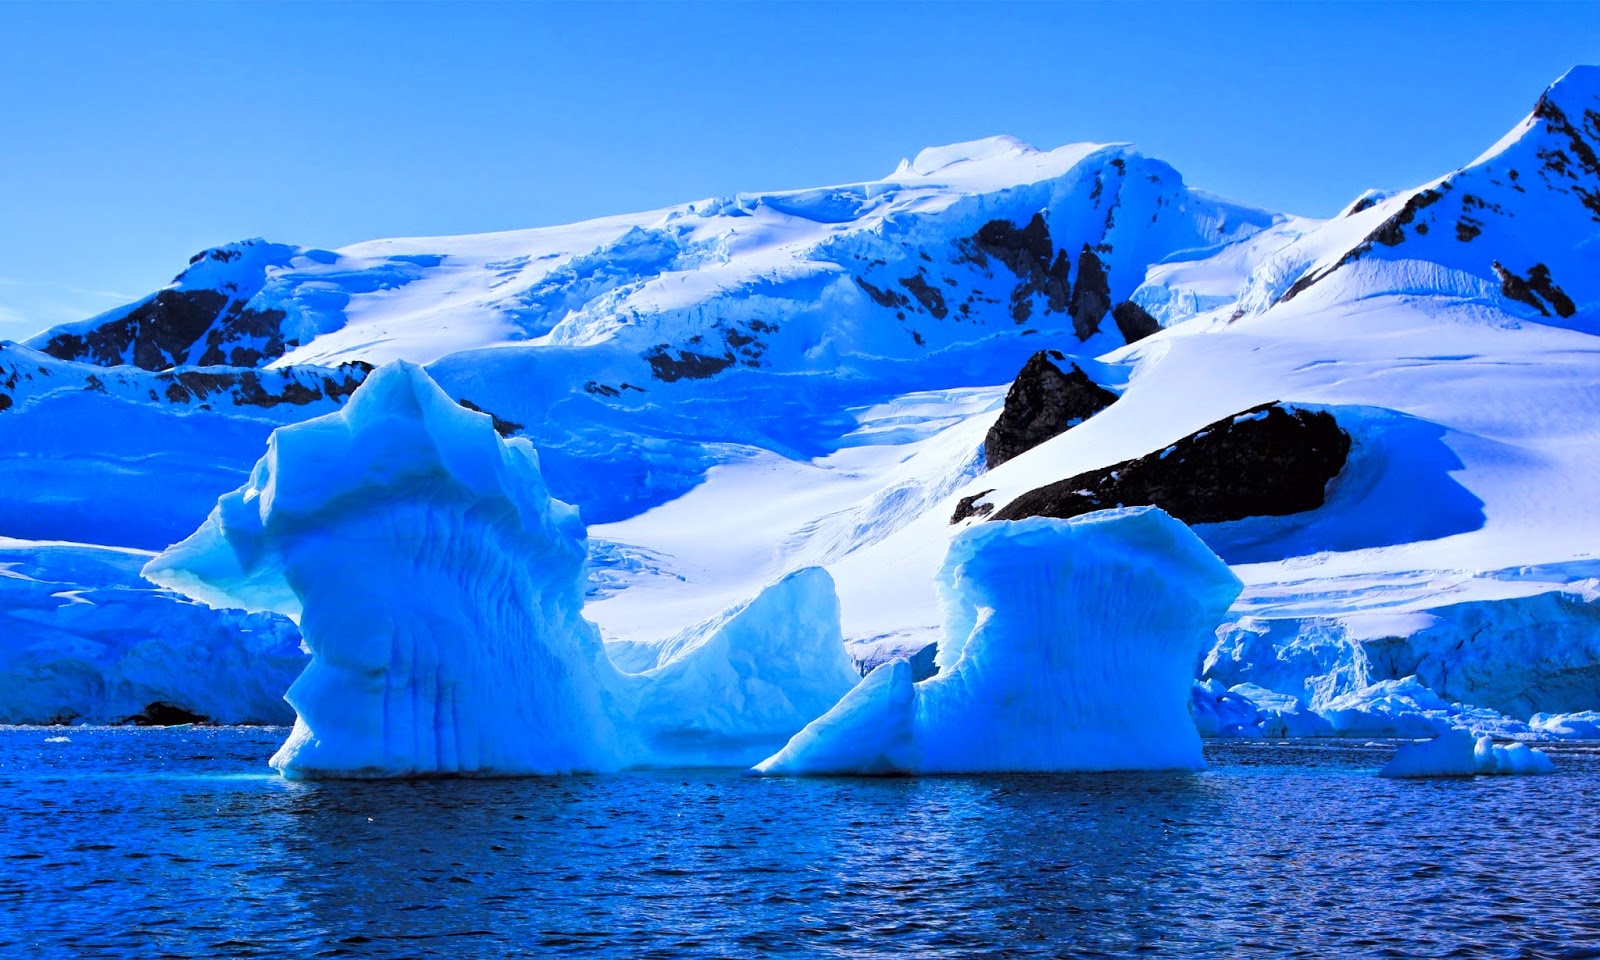  resolutions for antarctica hd wallpapers antarctica hd wallpapers 1600x960